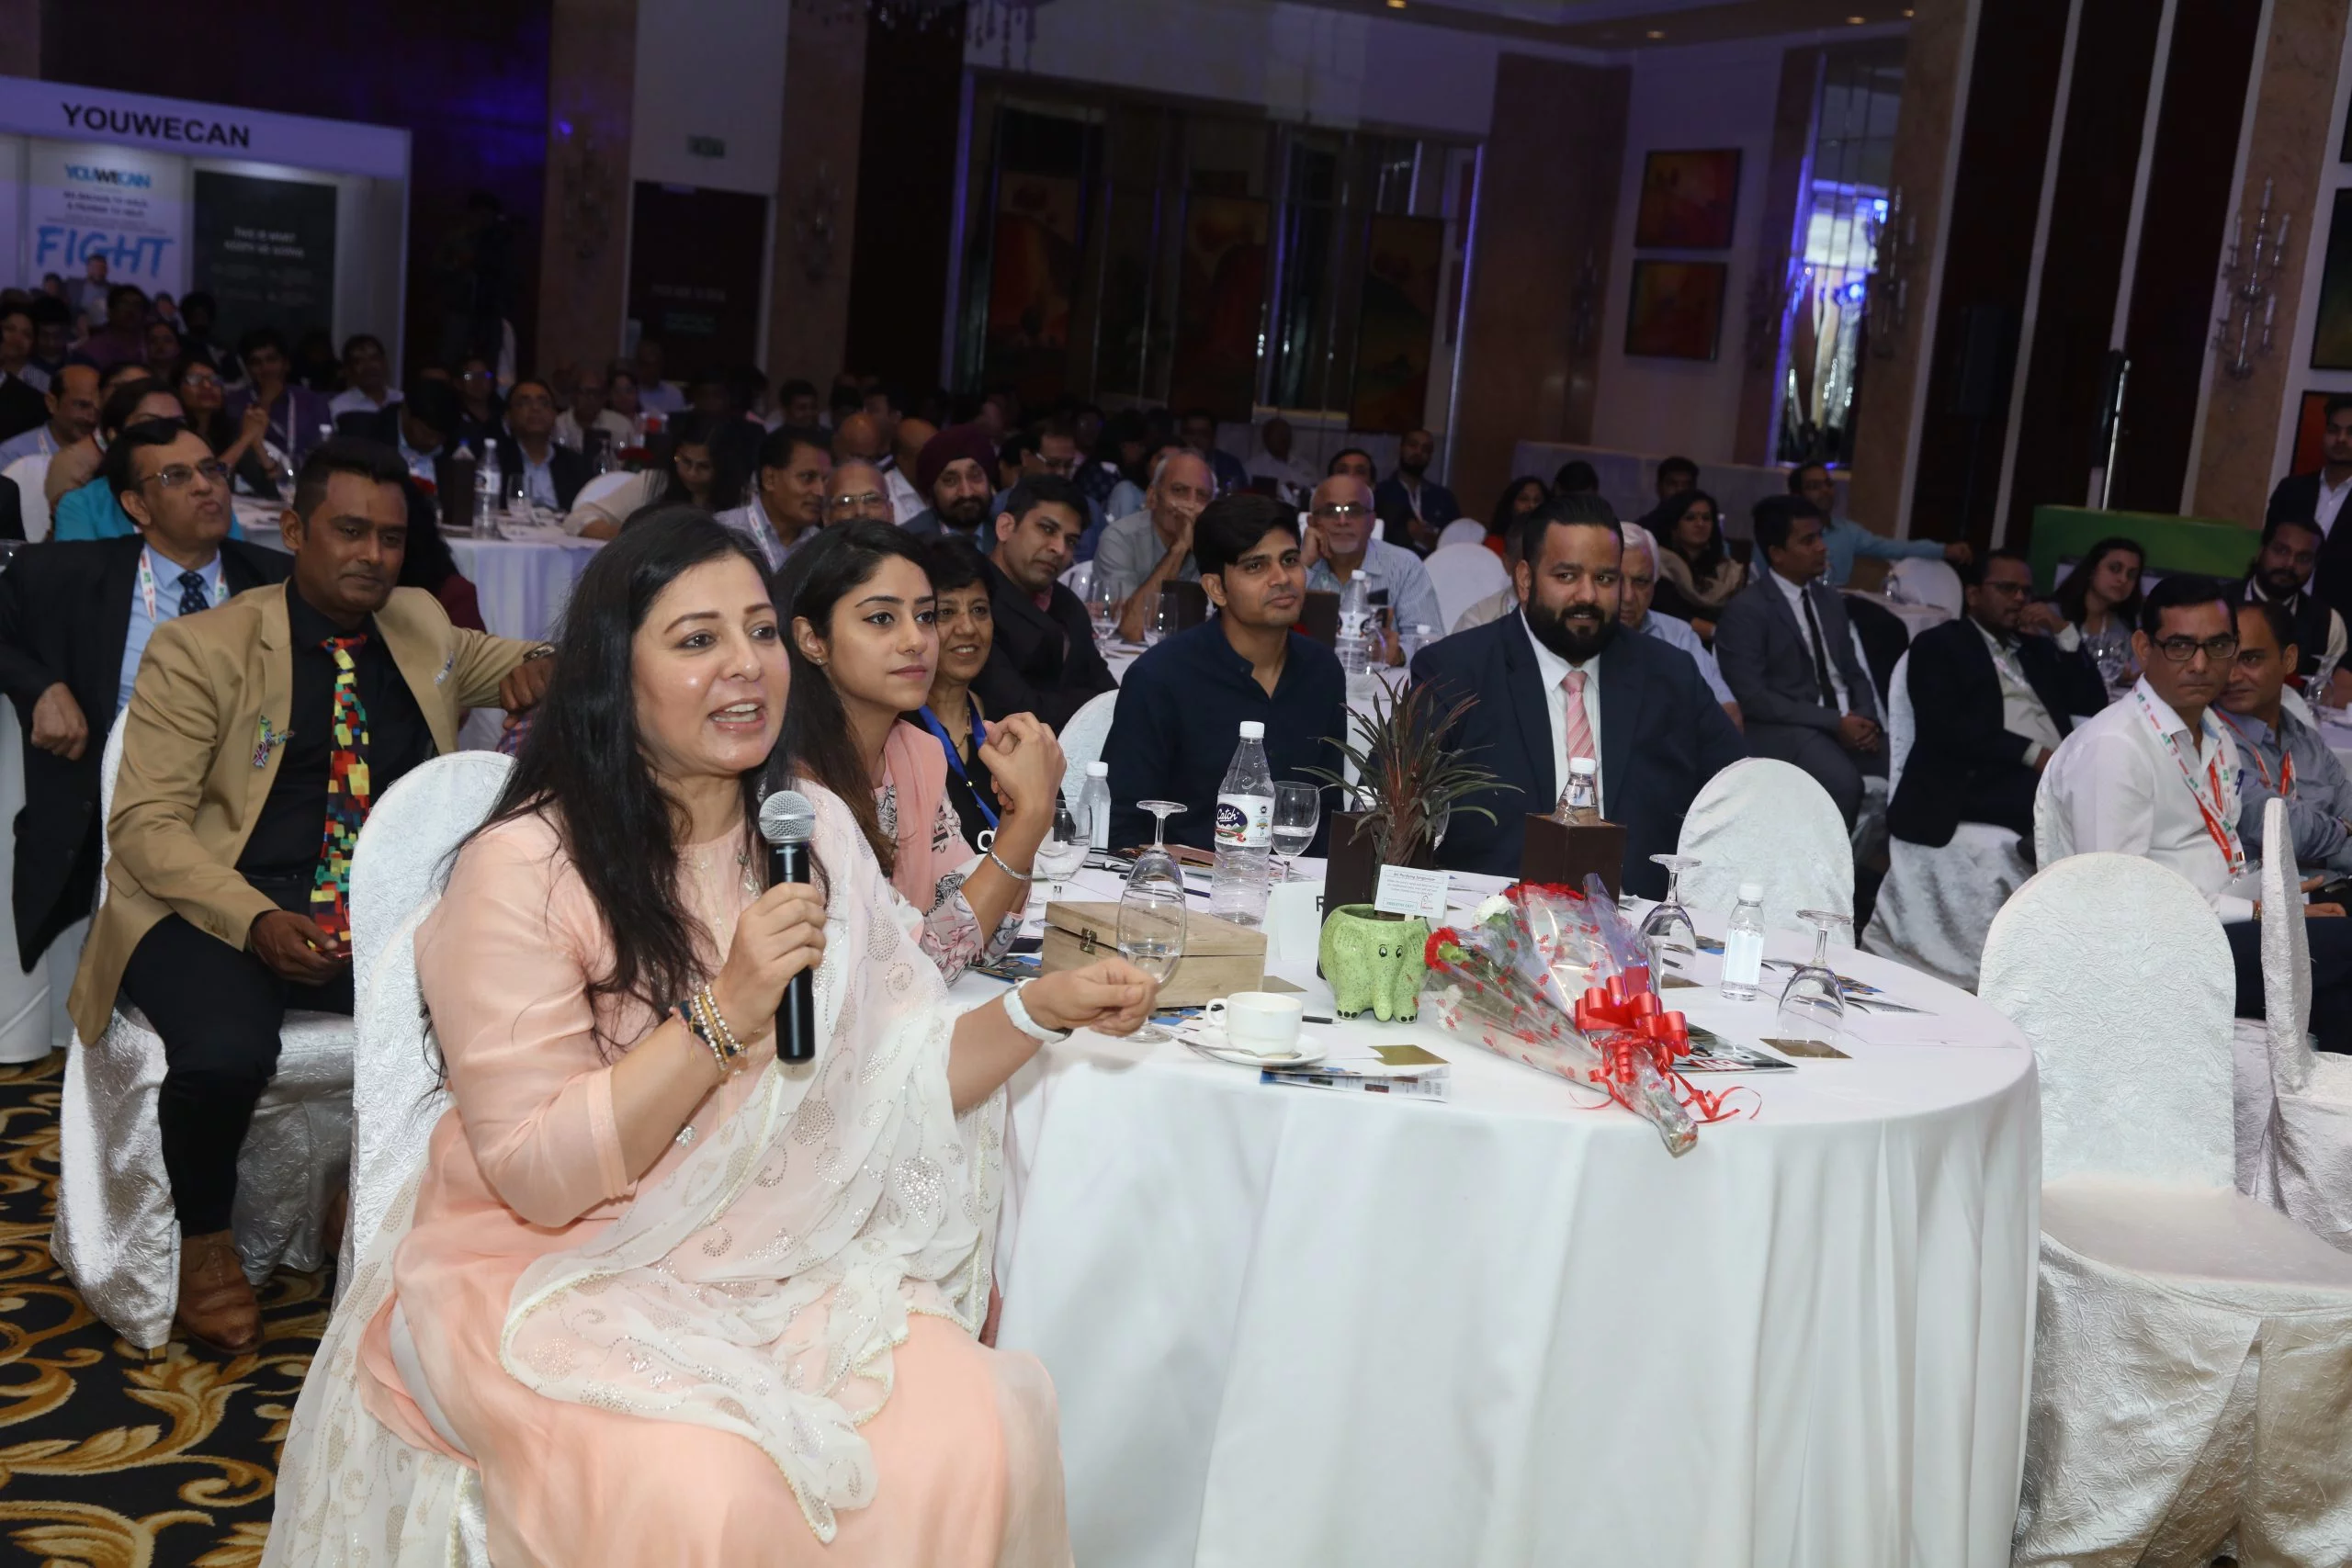 YouWeCan participates as an associate partner in CSR Conclave